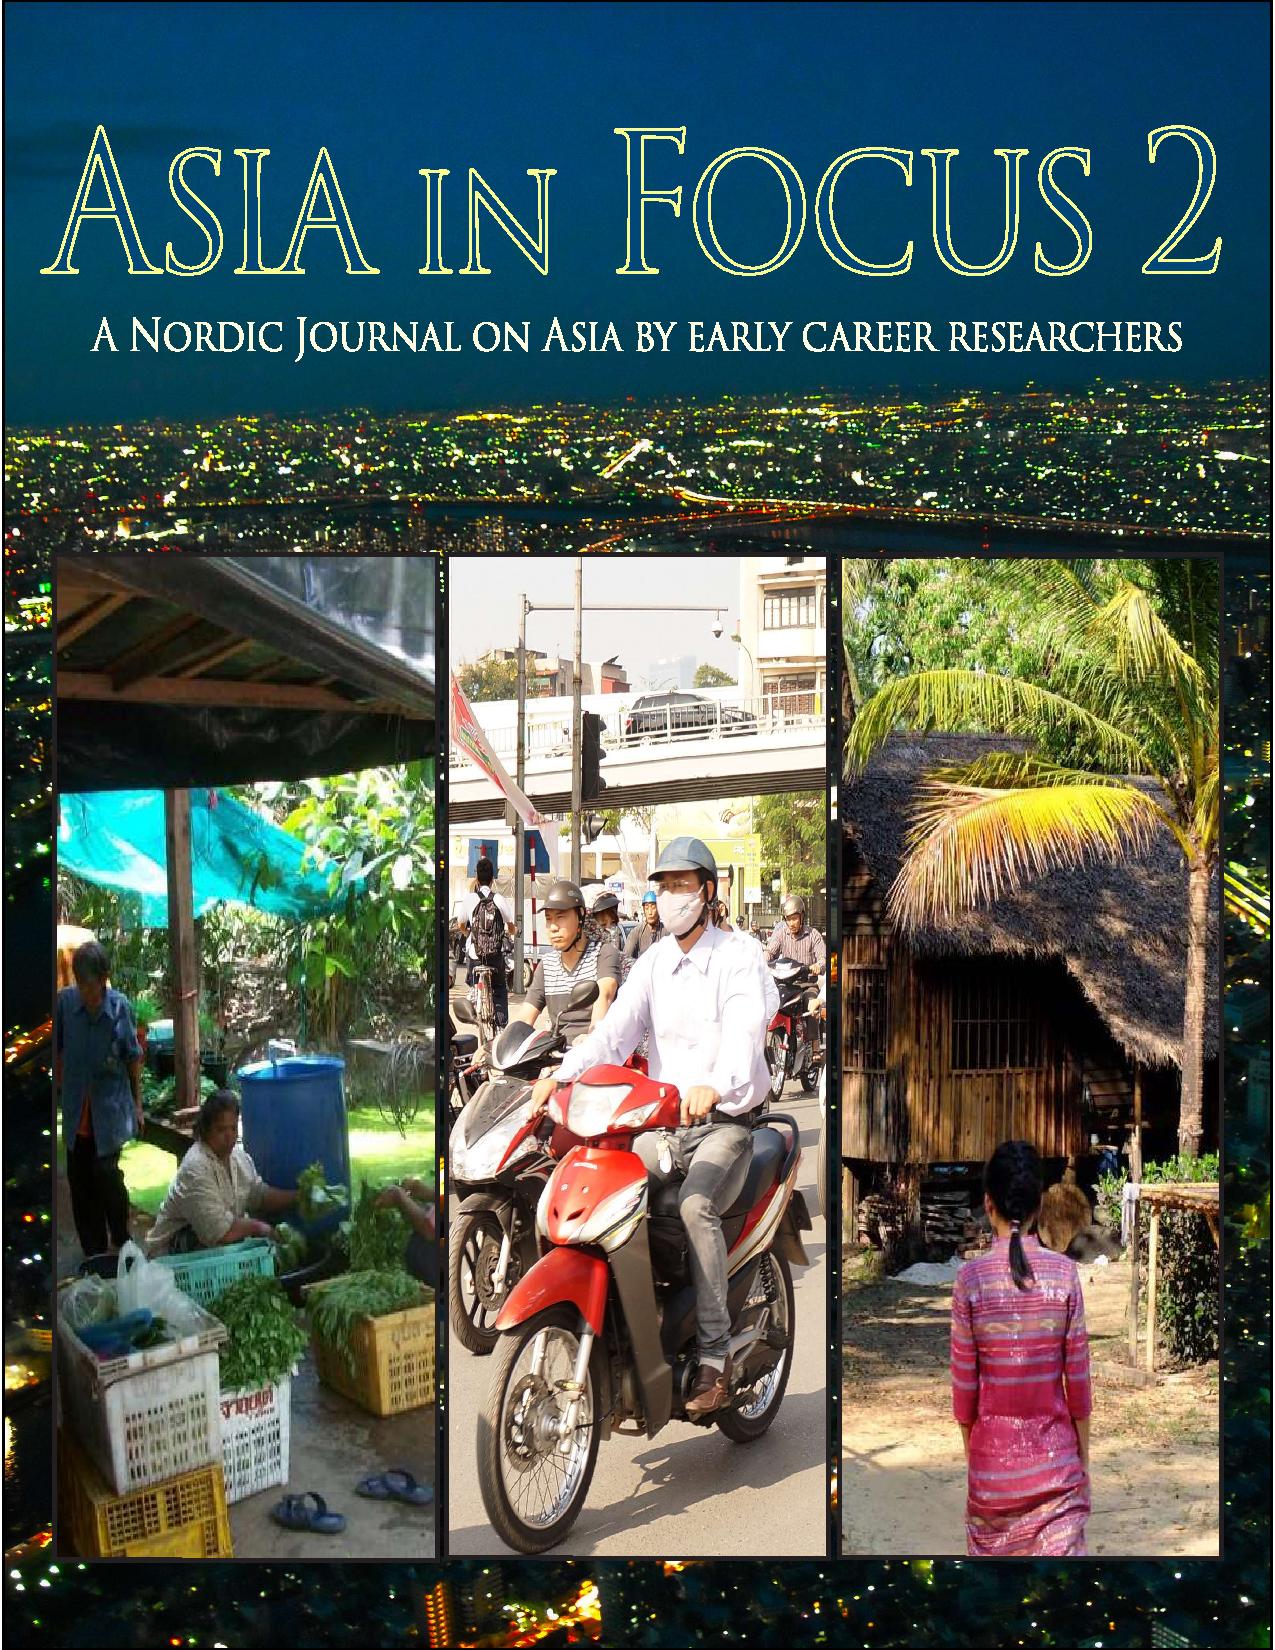 					View Vol. 2 (2015): Asia in Focus Issue 2
				